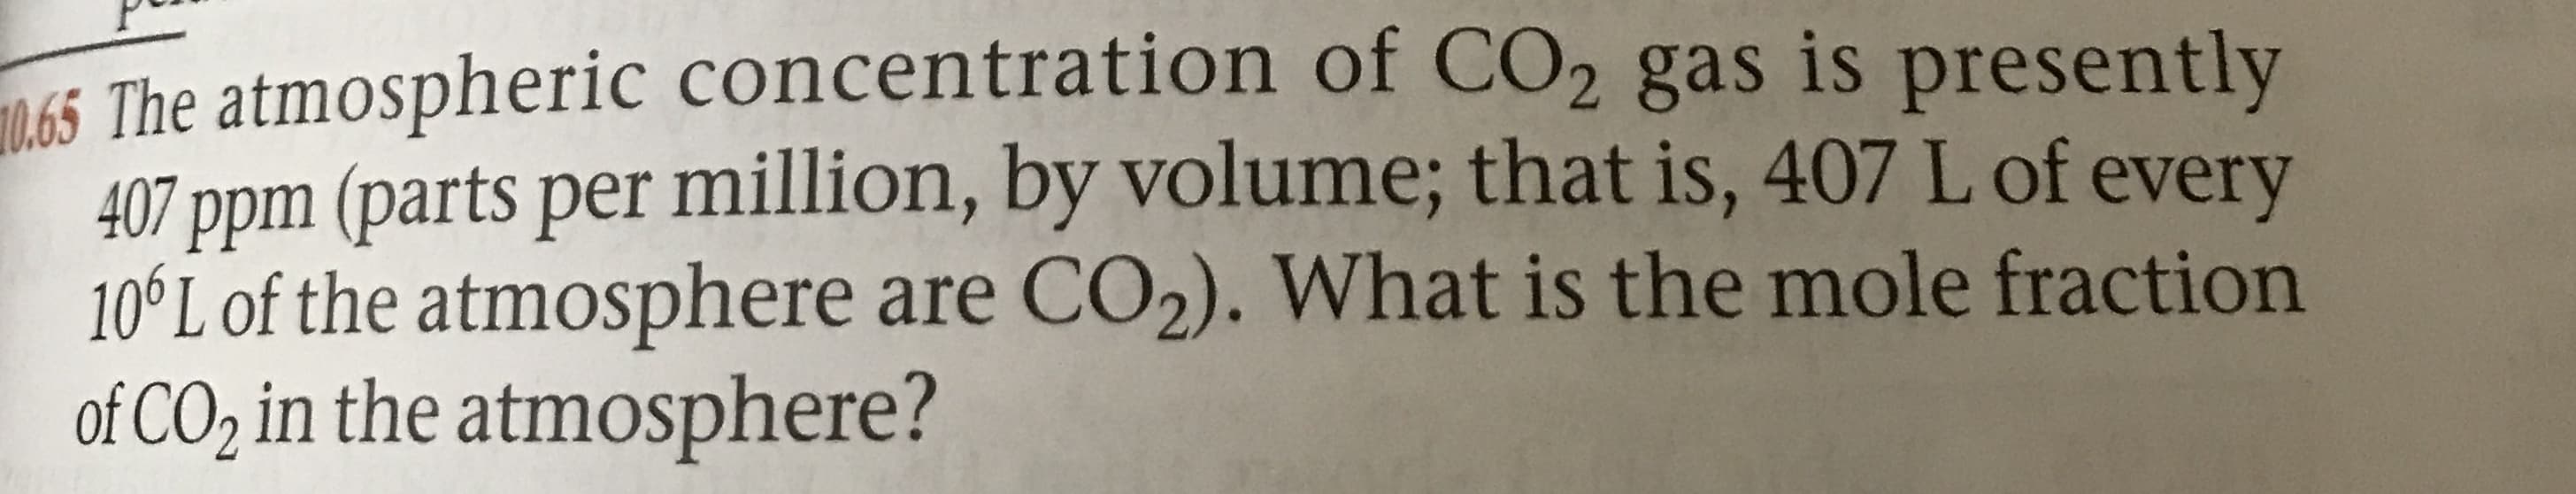 The atmospheric concentration of CO2 gas is presently
407 ppm (parts per million, by volume; that is, 407 L of every
10°L of the atmosphere are CO2). What is the mole fraction
of CO2 in the atmosphere?
